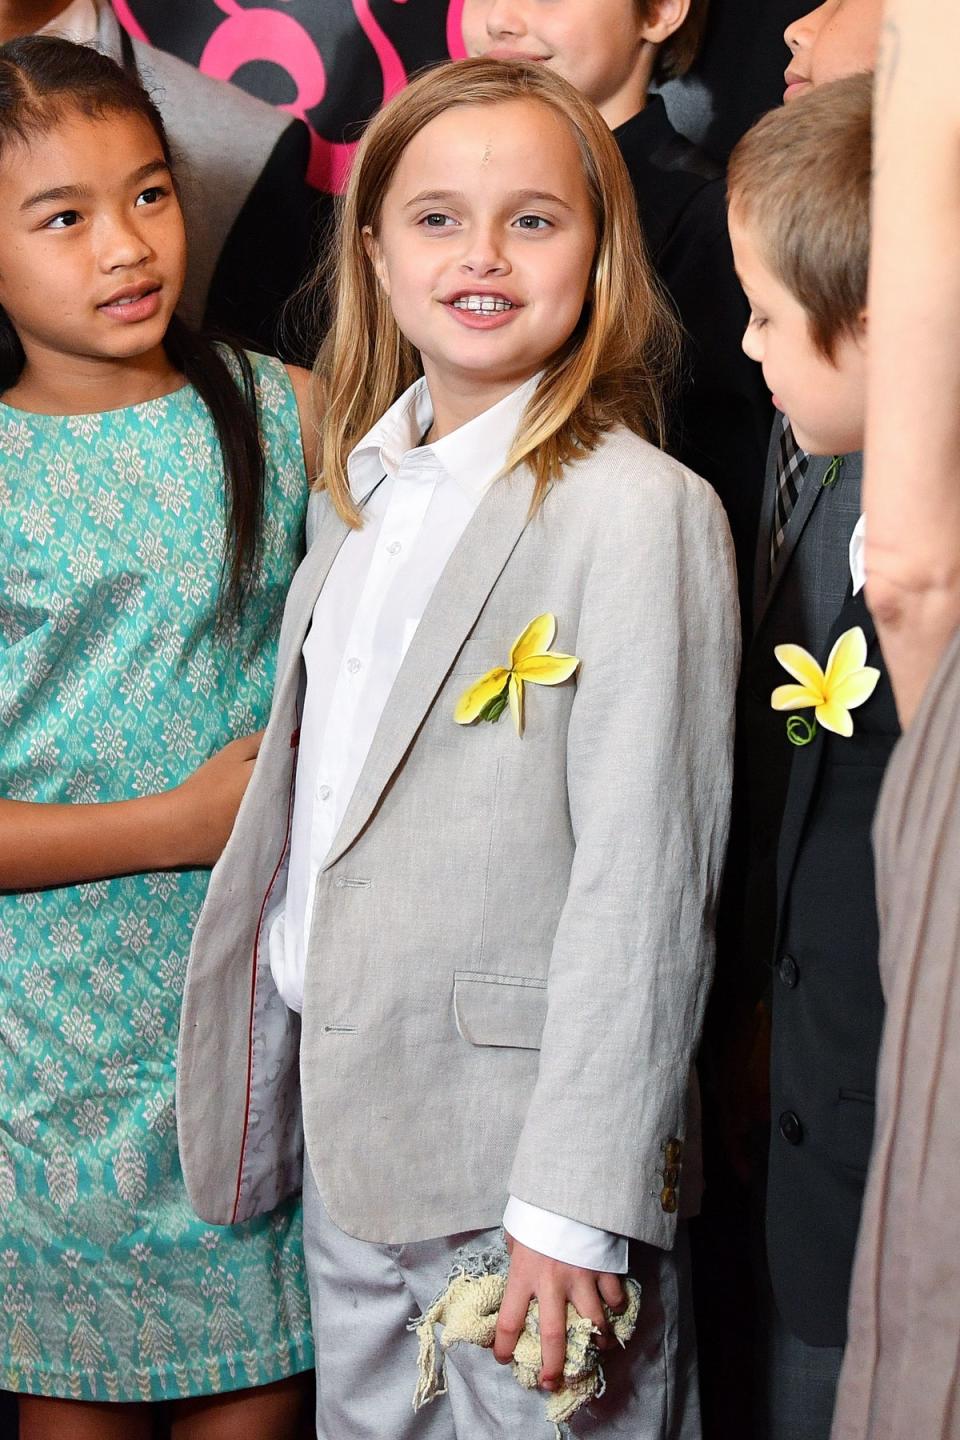 Vivienne Jolie-Pitt (C) attends the First They Killed My Father New York premiere at DGA Theater on September 14, 2017 in New York City (Getty Images)